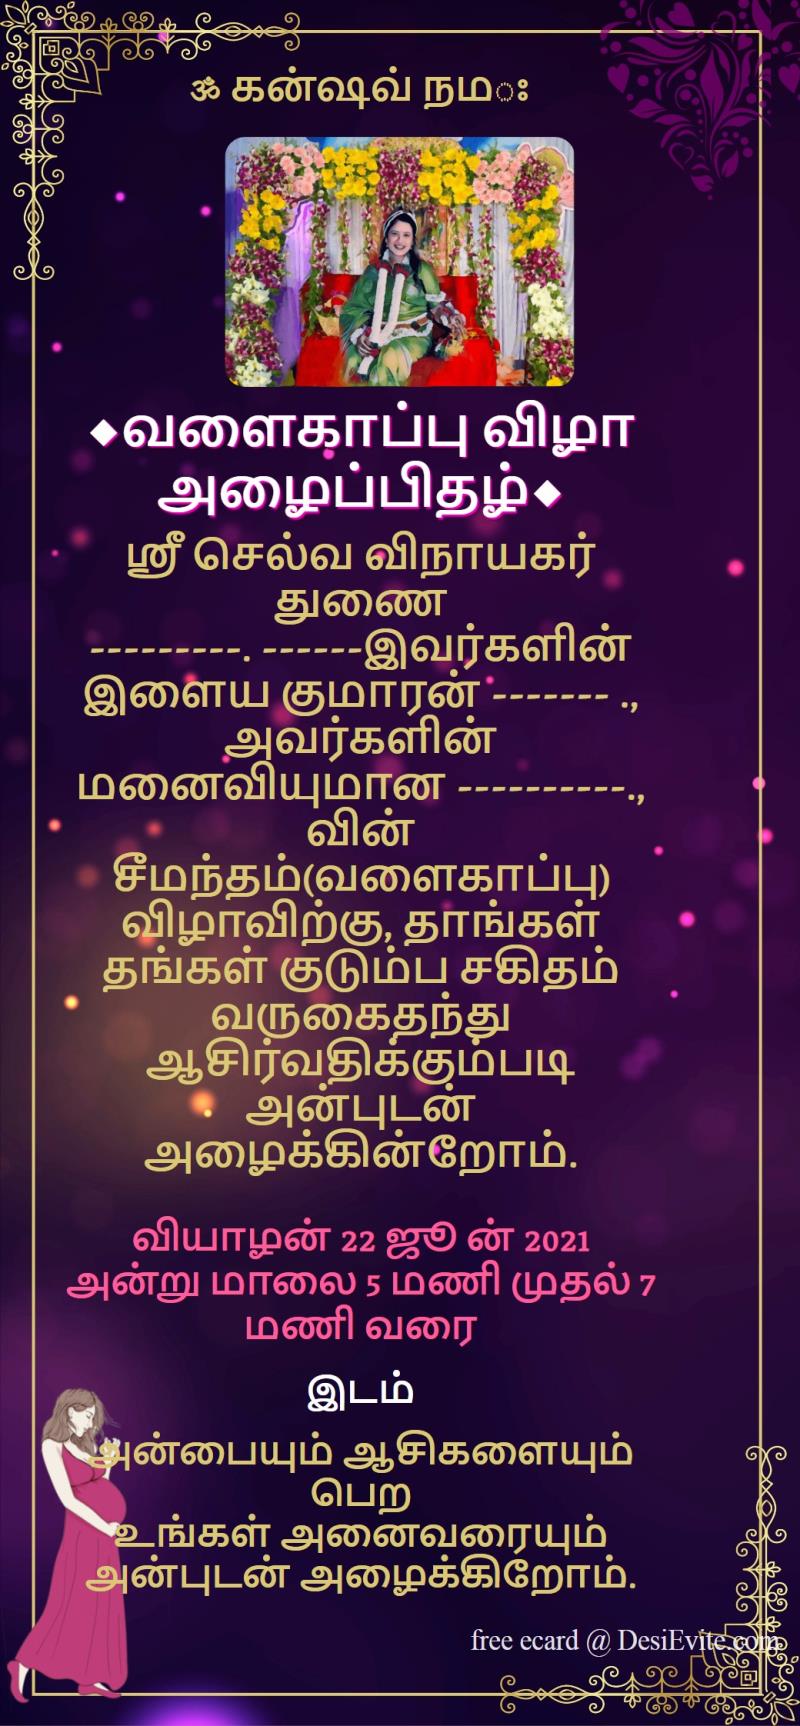 Tamil indian baby shower invitation card purple background 103